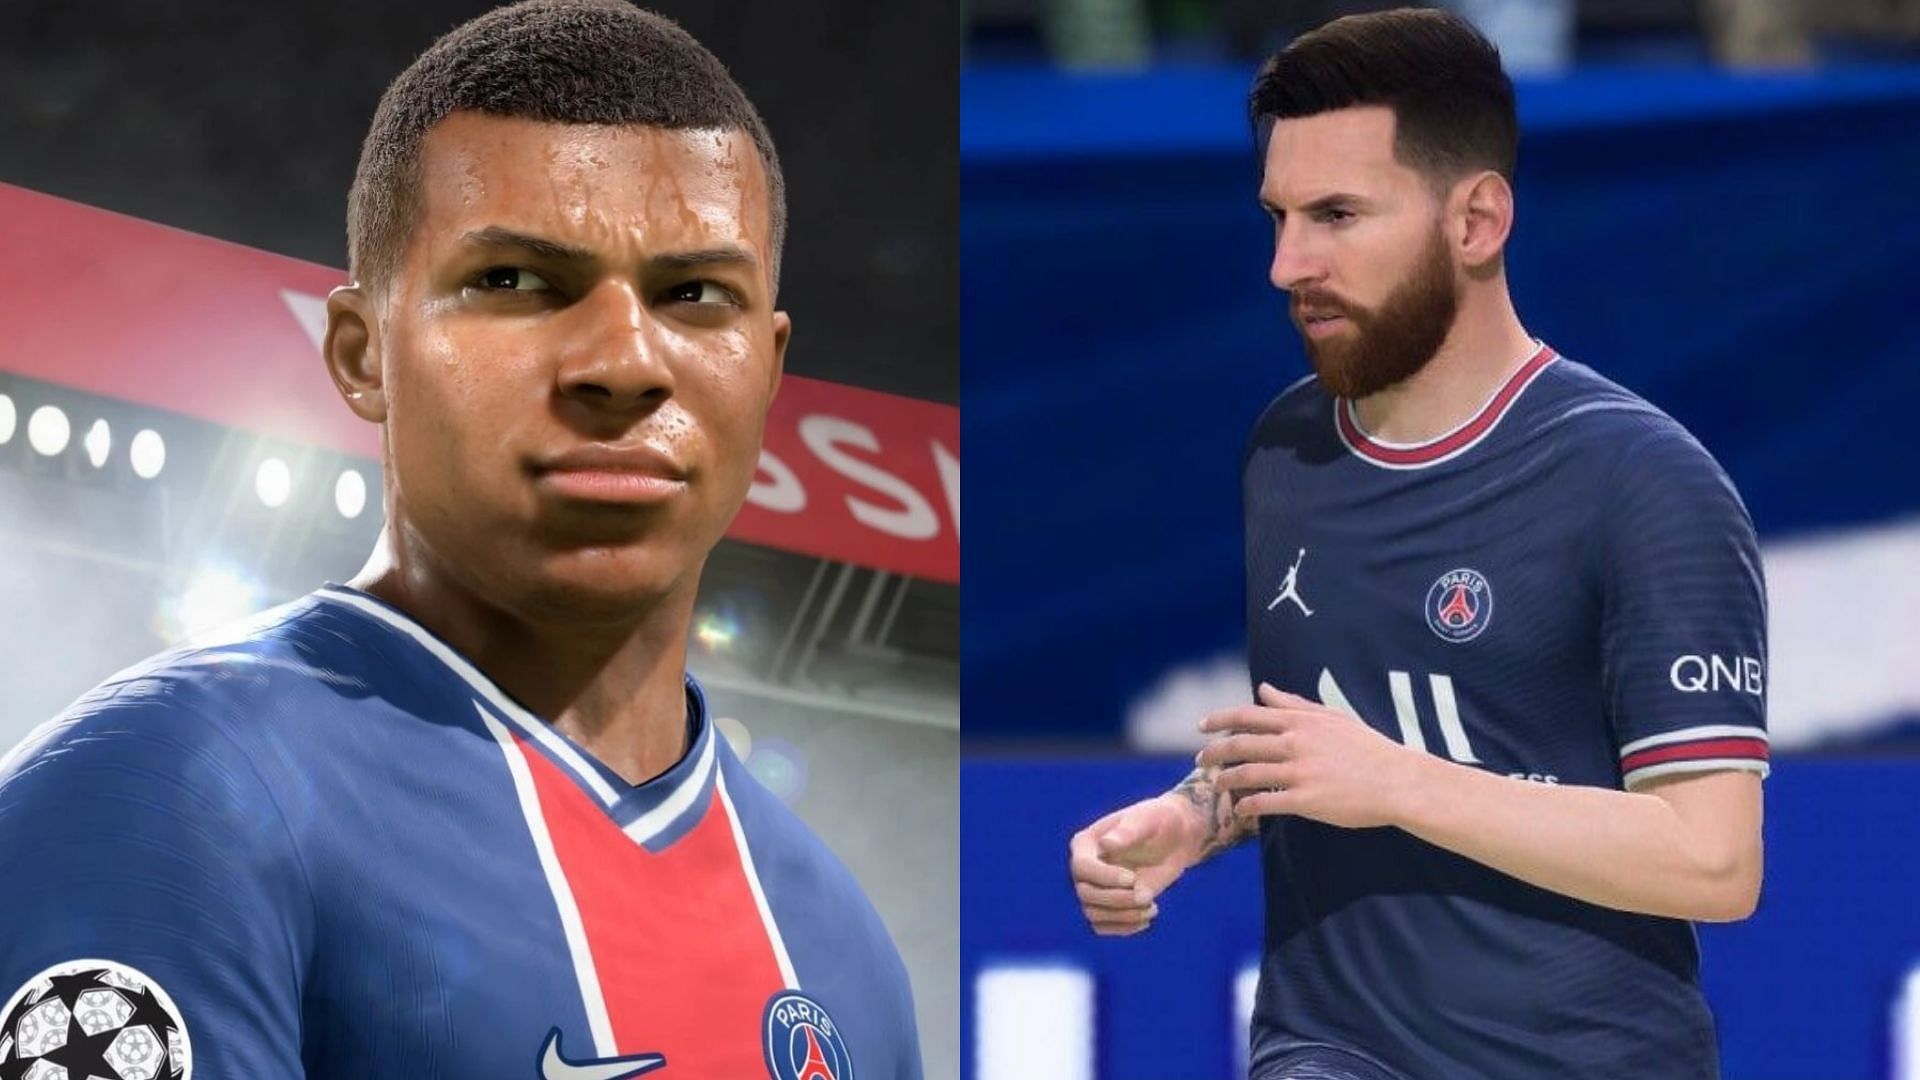 Mbappe and Messi are the top dogs in FIFA 23 (Image via EA Sports)